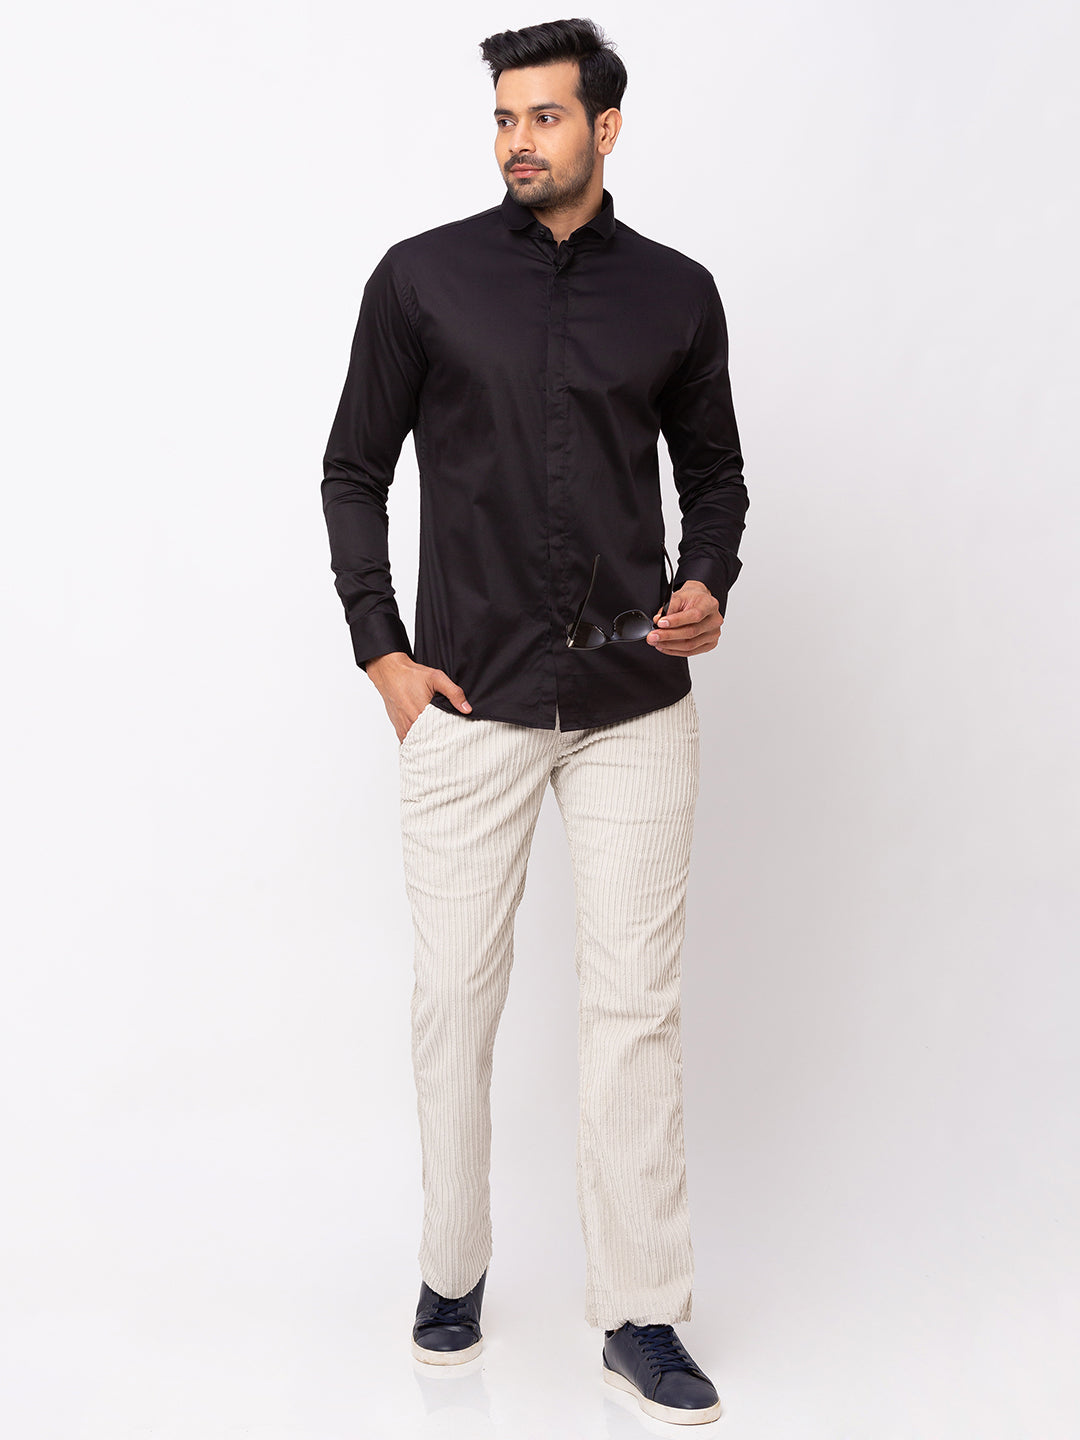 Black Formal Shirt with Concealed Buttons